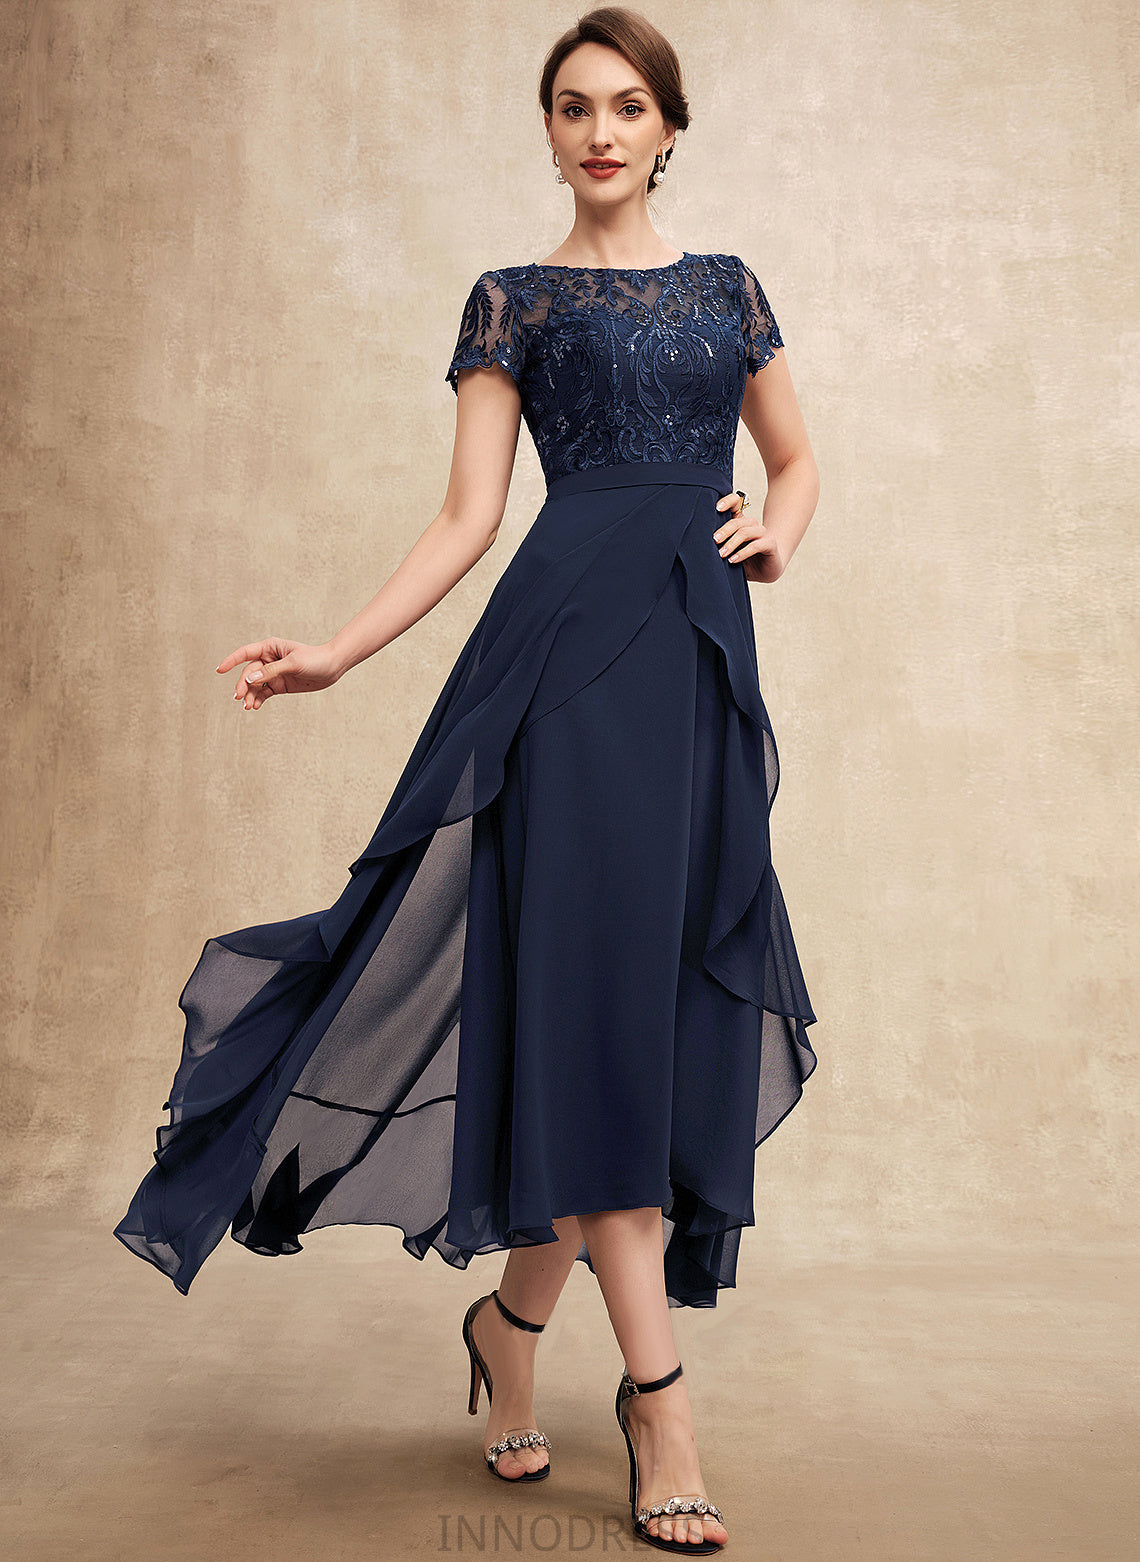 Ruffles A-Line Chiffon Cascading Bow(s) Mother With Olympia Dress Neck Bride Asymmetrical the Scoop Lace of Sequins Mother of the Bride Dresses